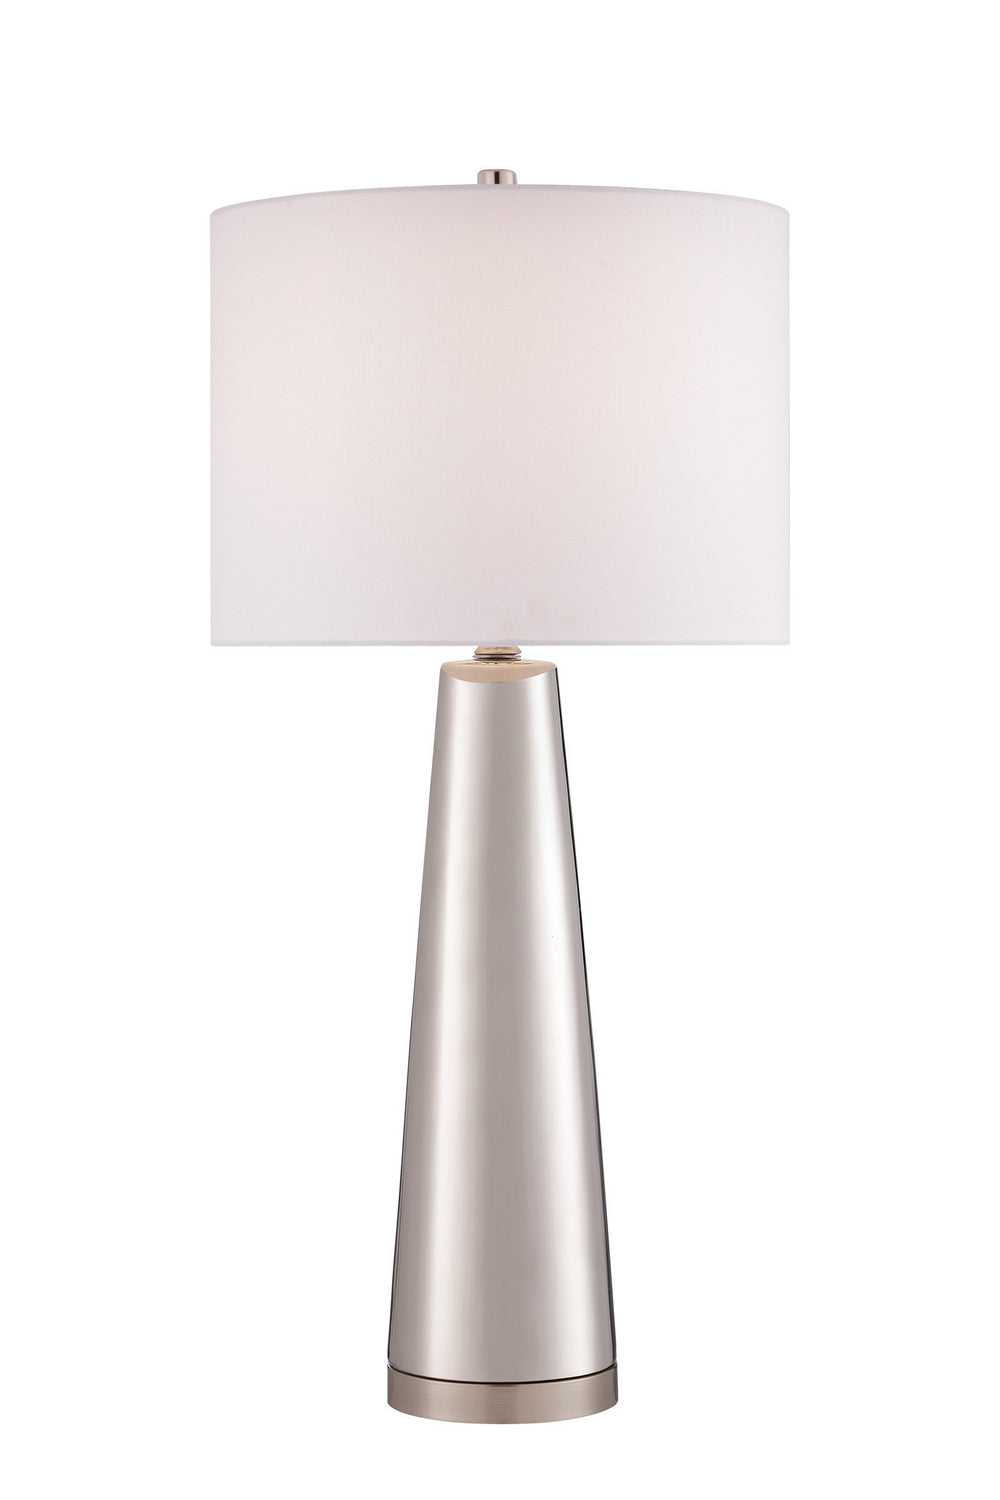 Lite Source (LS-23200SILV) Tyrone Table Lamp